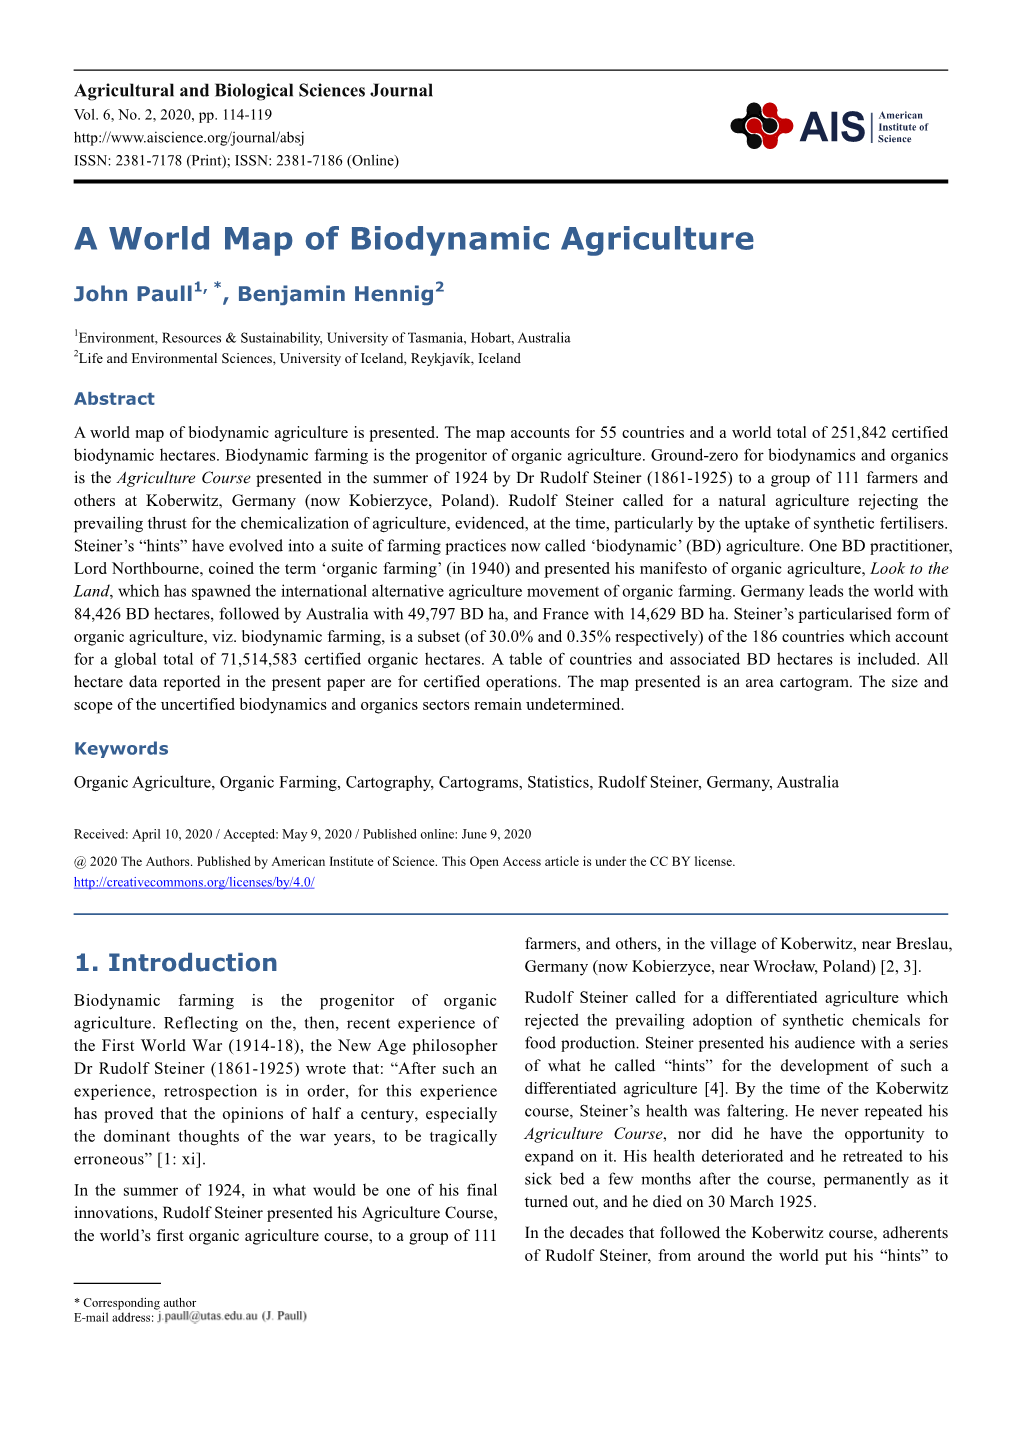 A World Map of Biodynamic Agriculture